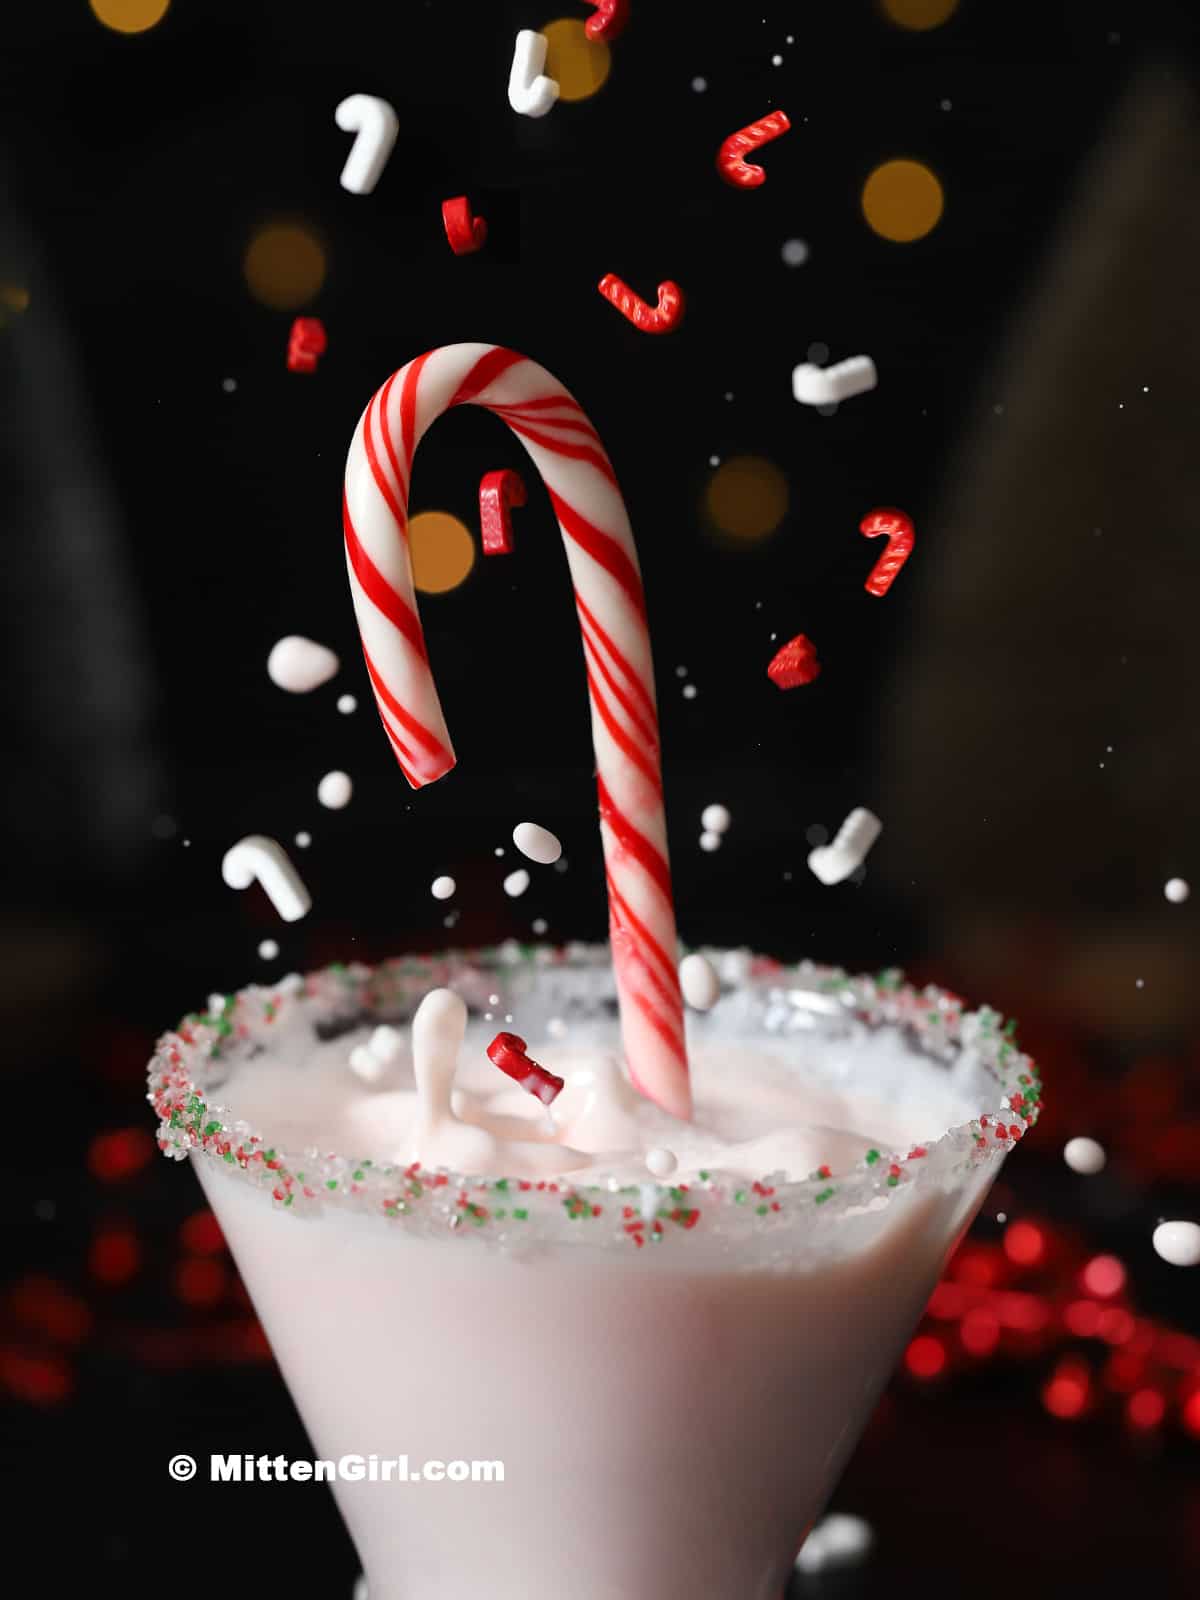 A candy cane and decorations splashing into a martini.